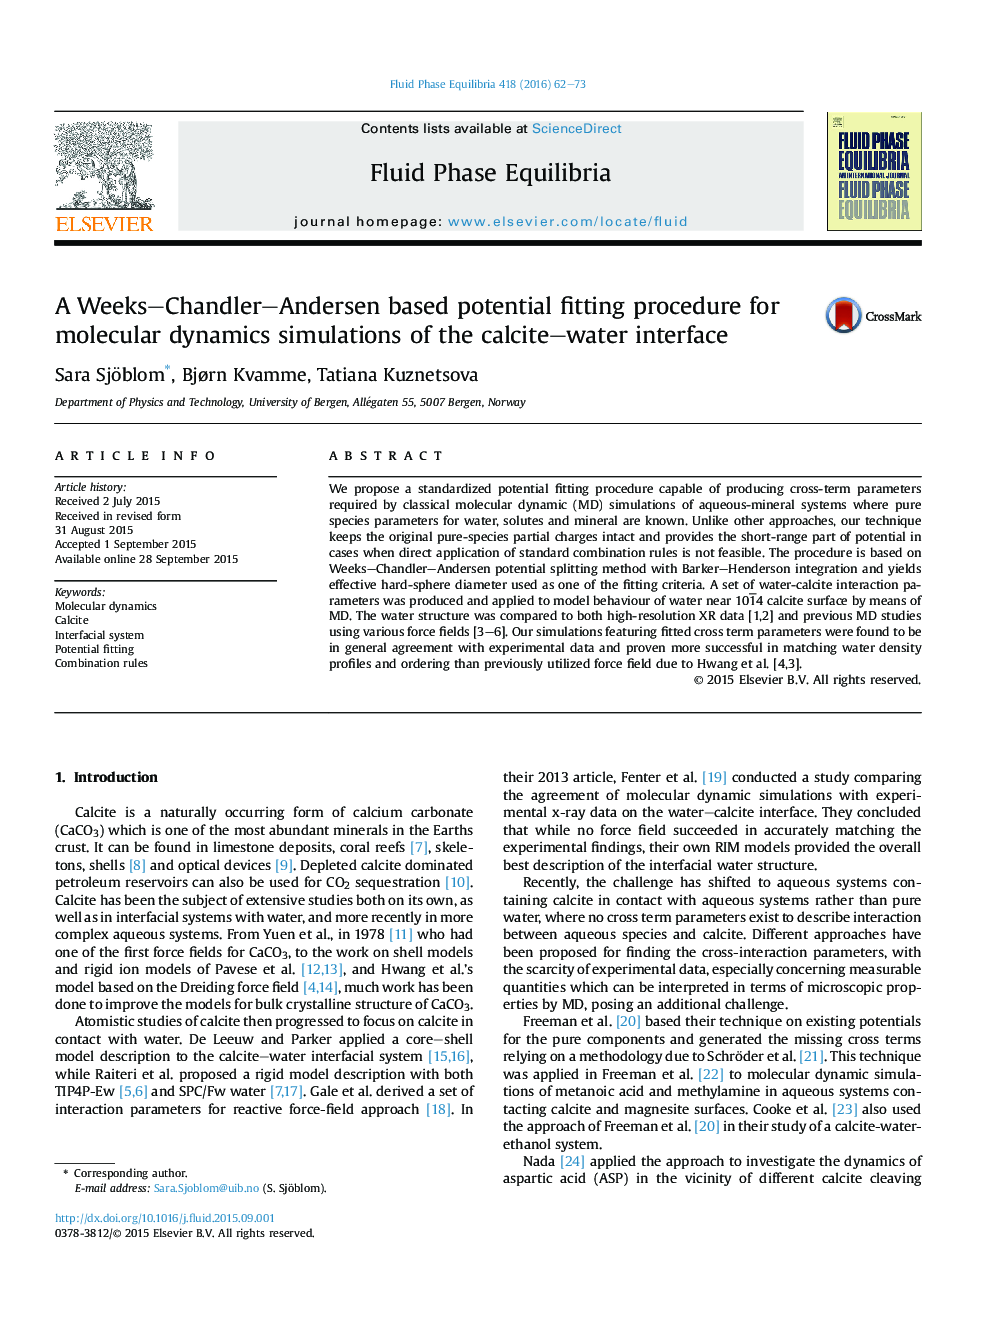 A Weeks–Chandler–Andersen based potential fitting procedure for molecular dynamics simulations of the calcite–water interface